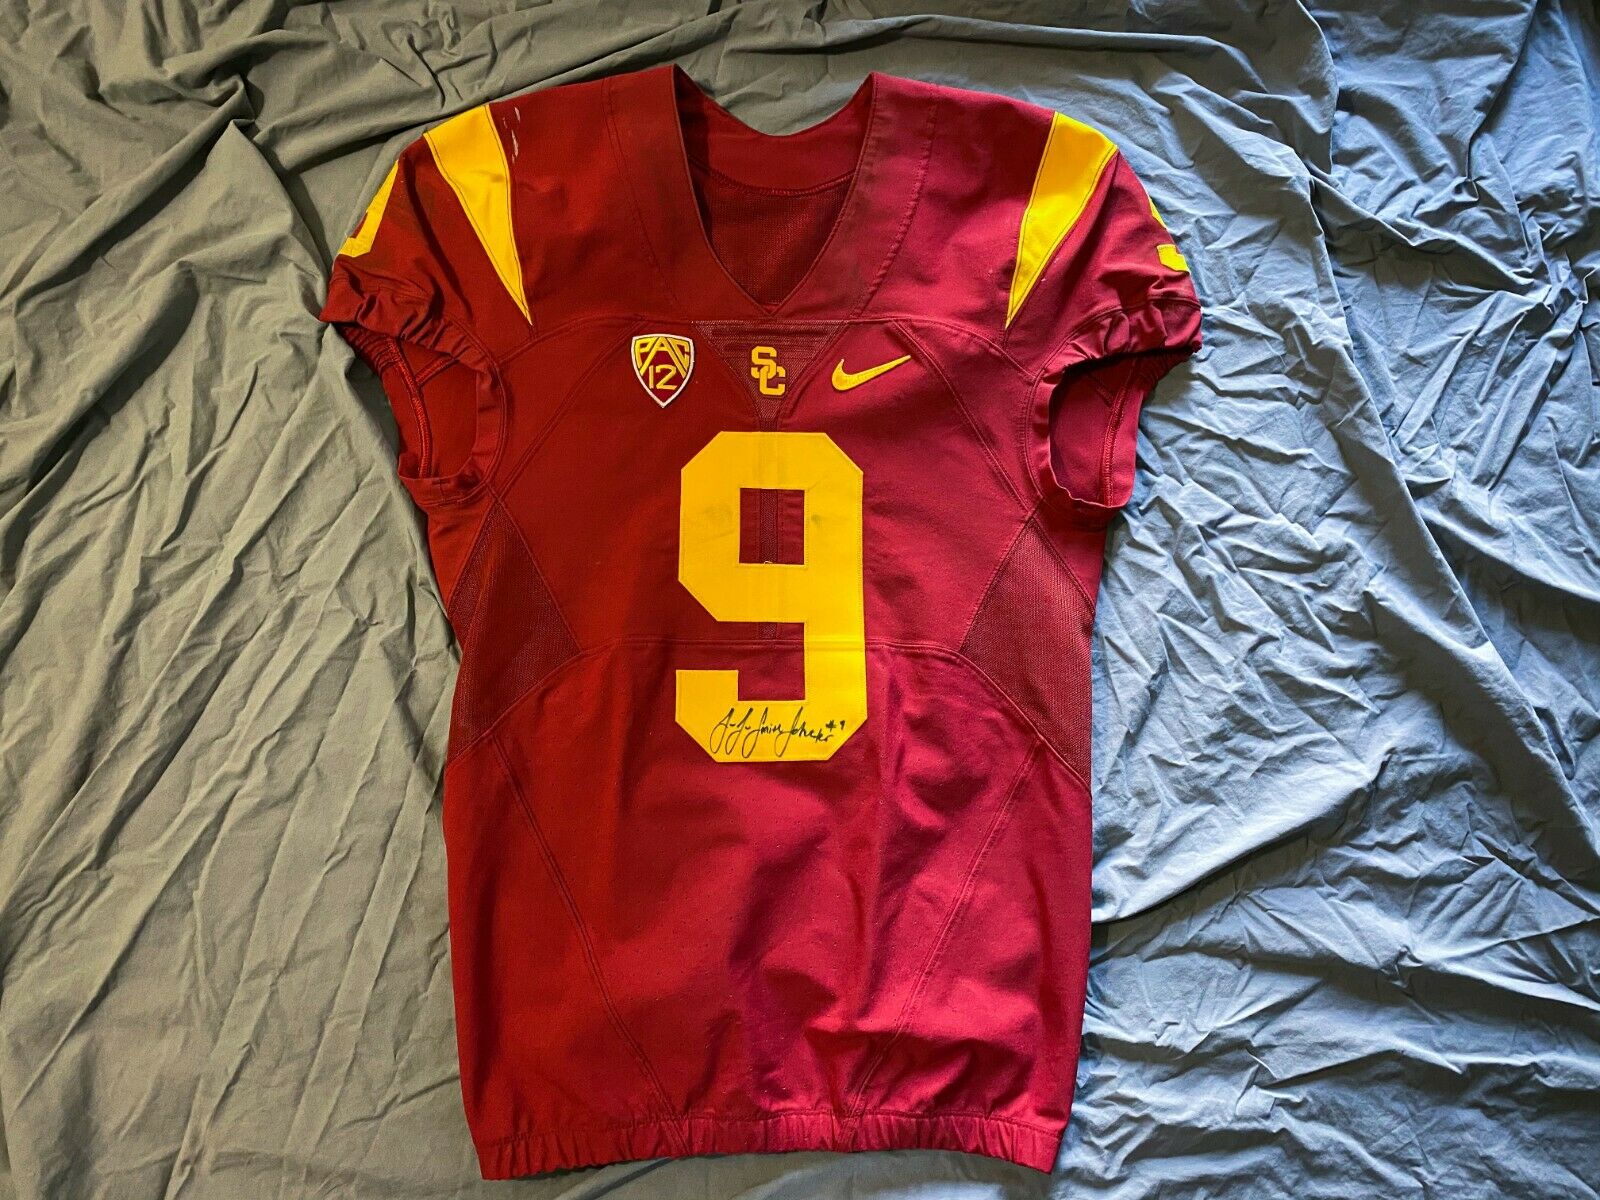 JuJu Smith-Schuster Signed Game-Worn/Used USC Jersey - Steelers